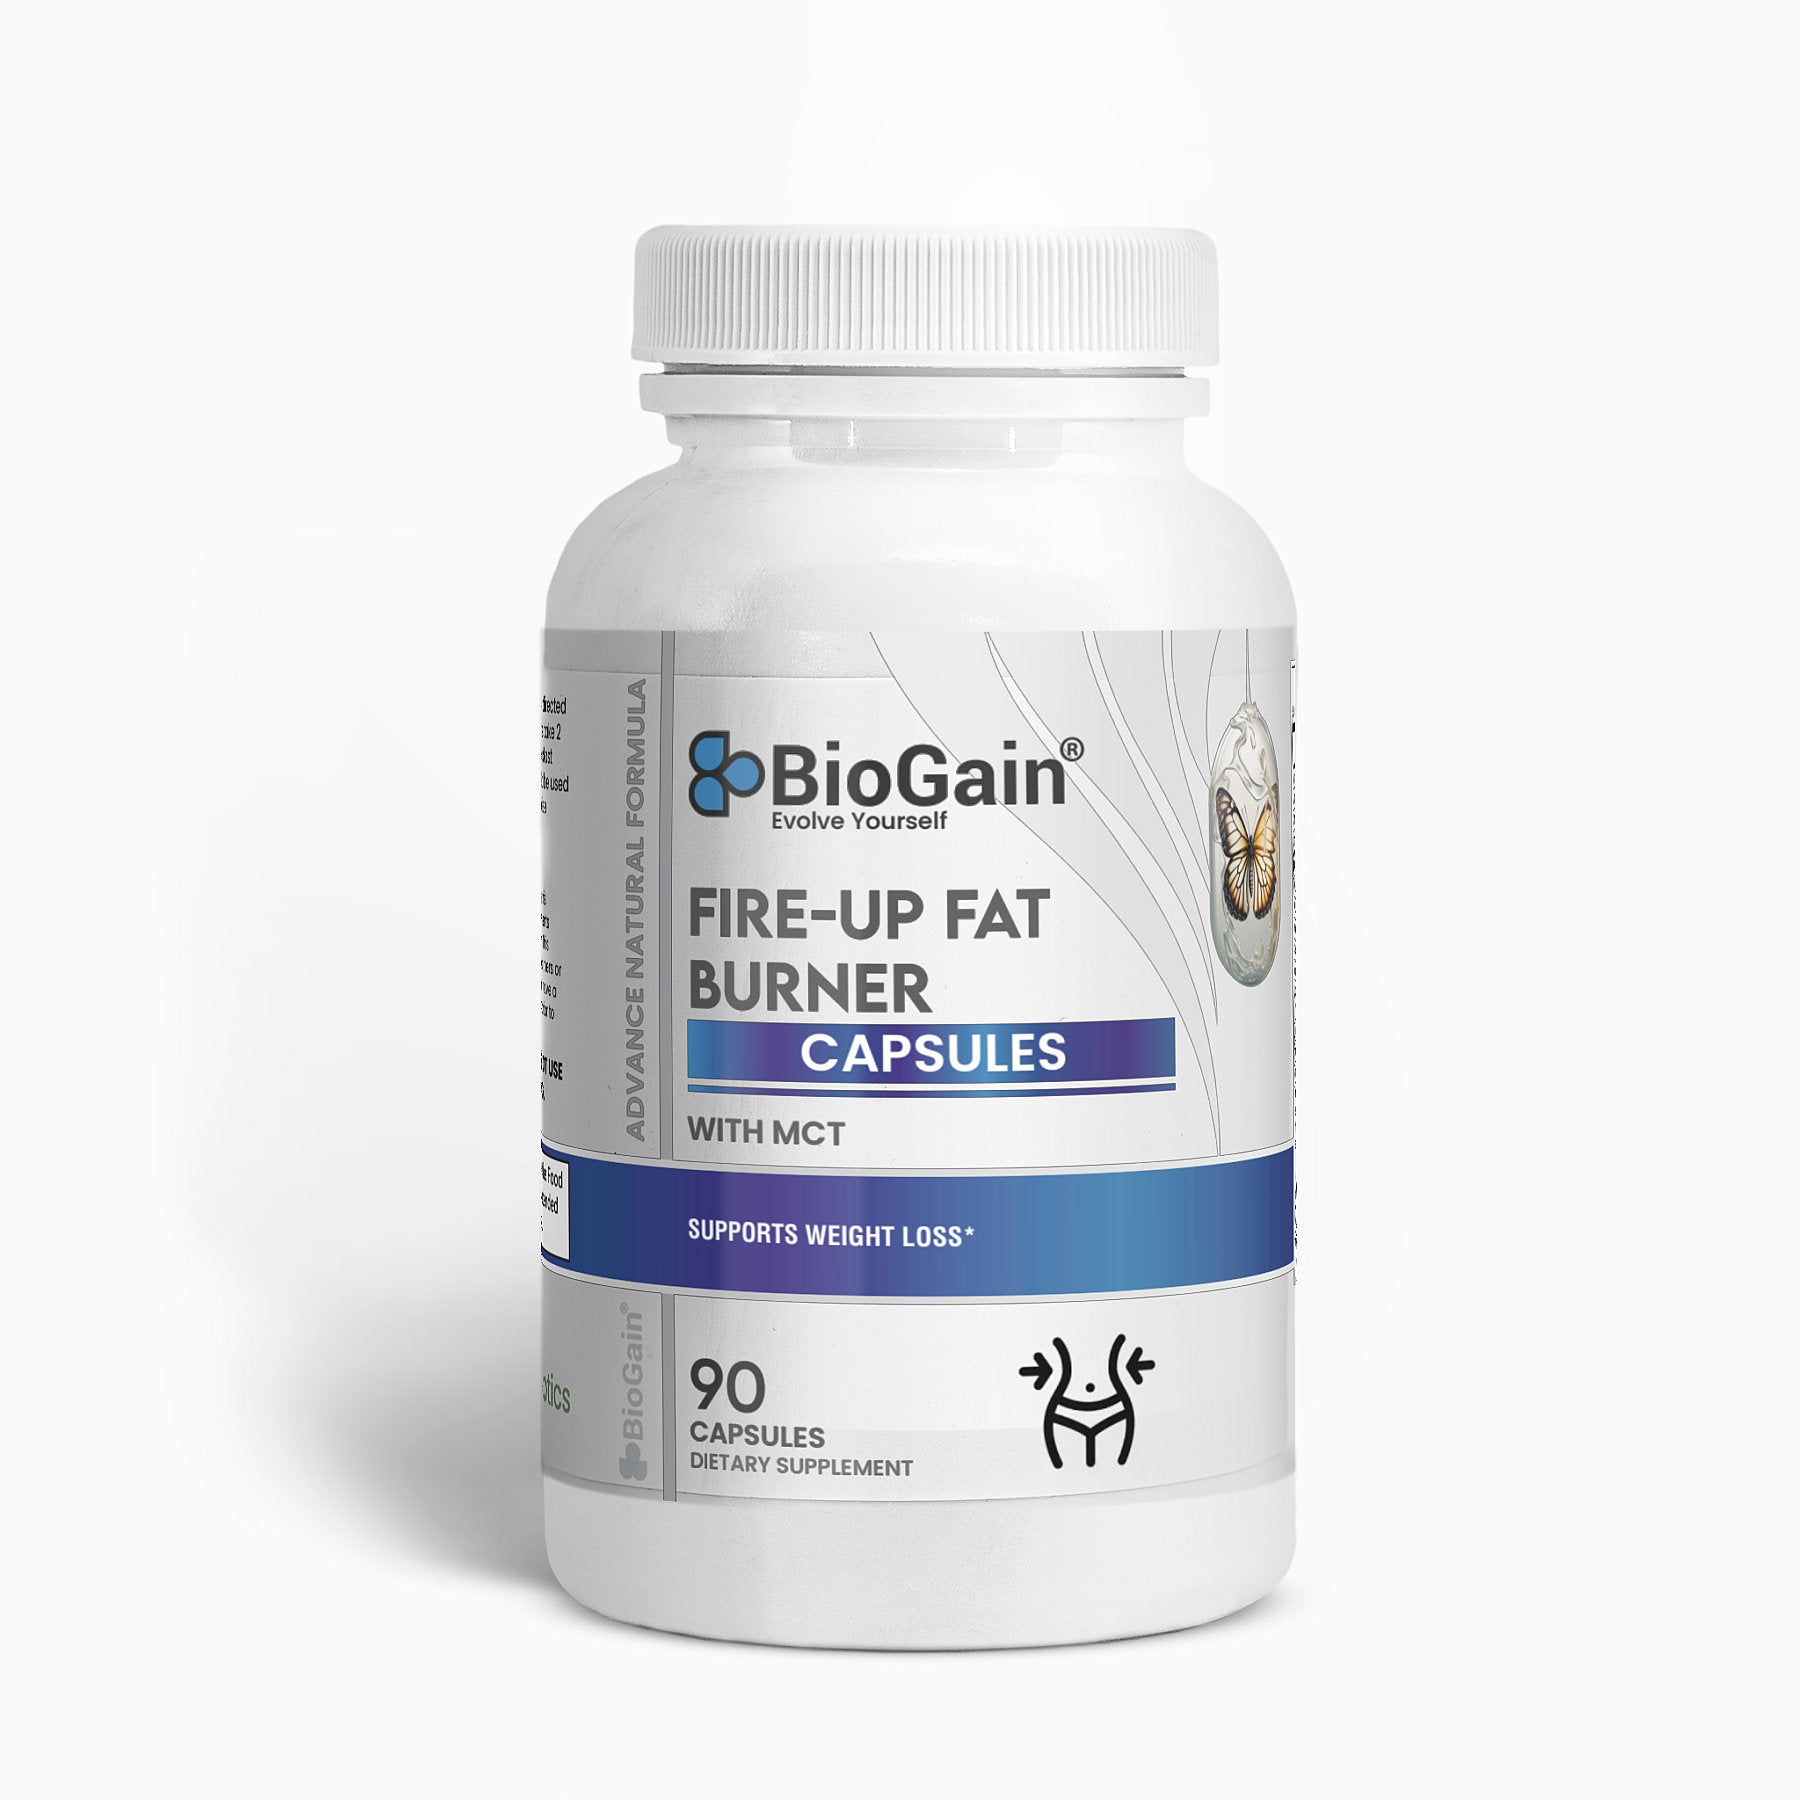 BioGain® Fire-Up Fat Burner with MCT